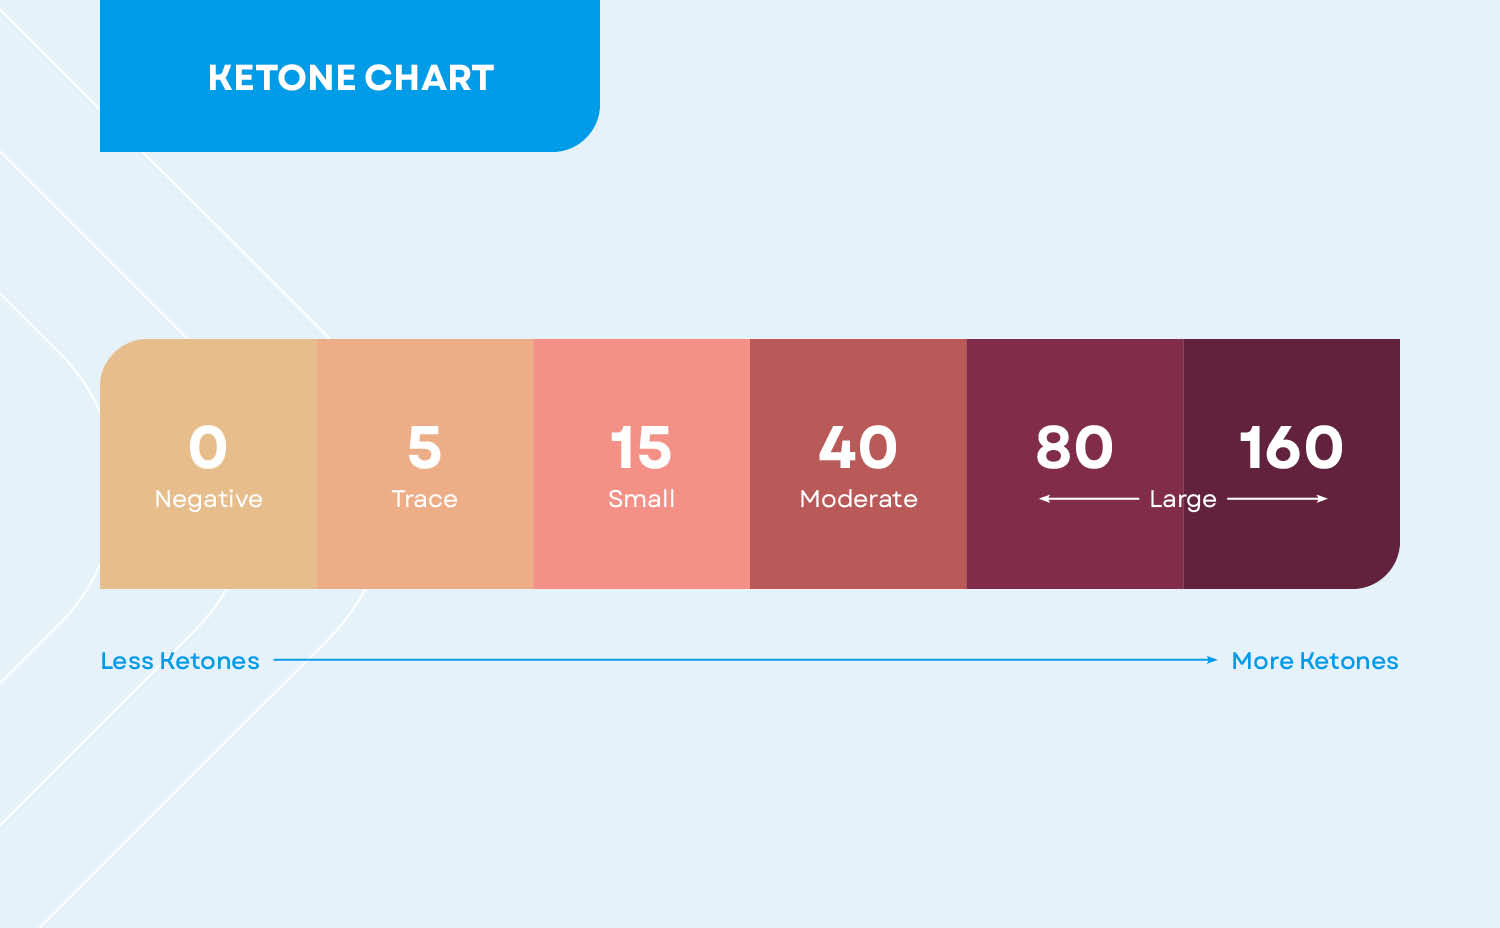 A color chart showing levels of ketones in urinalysis